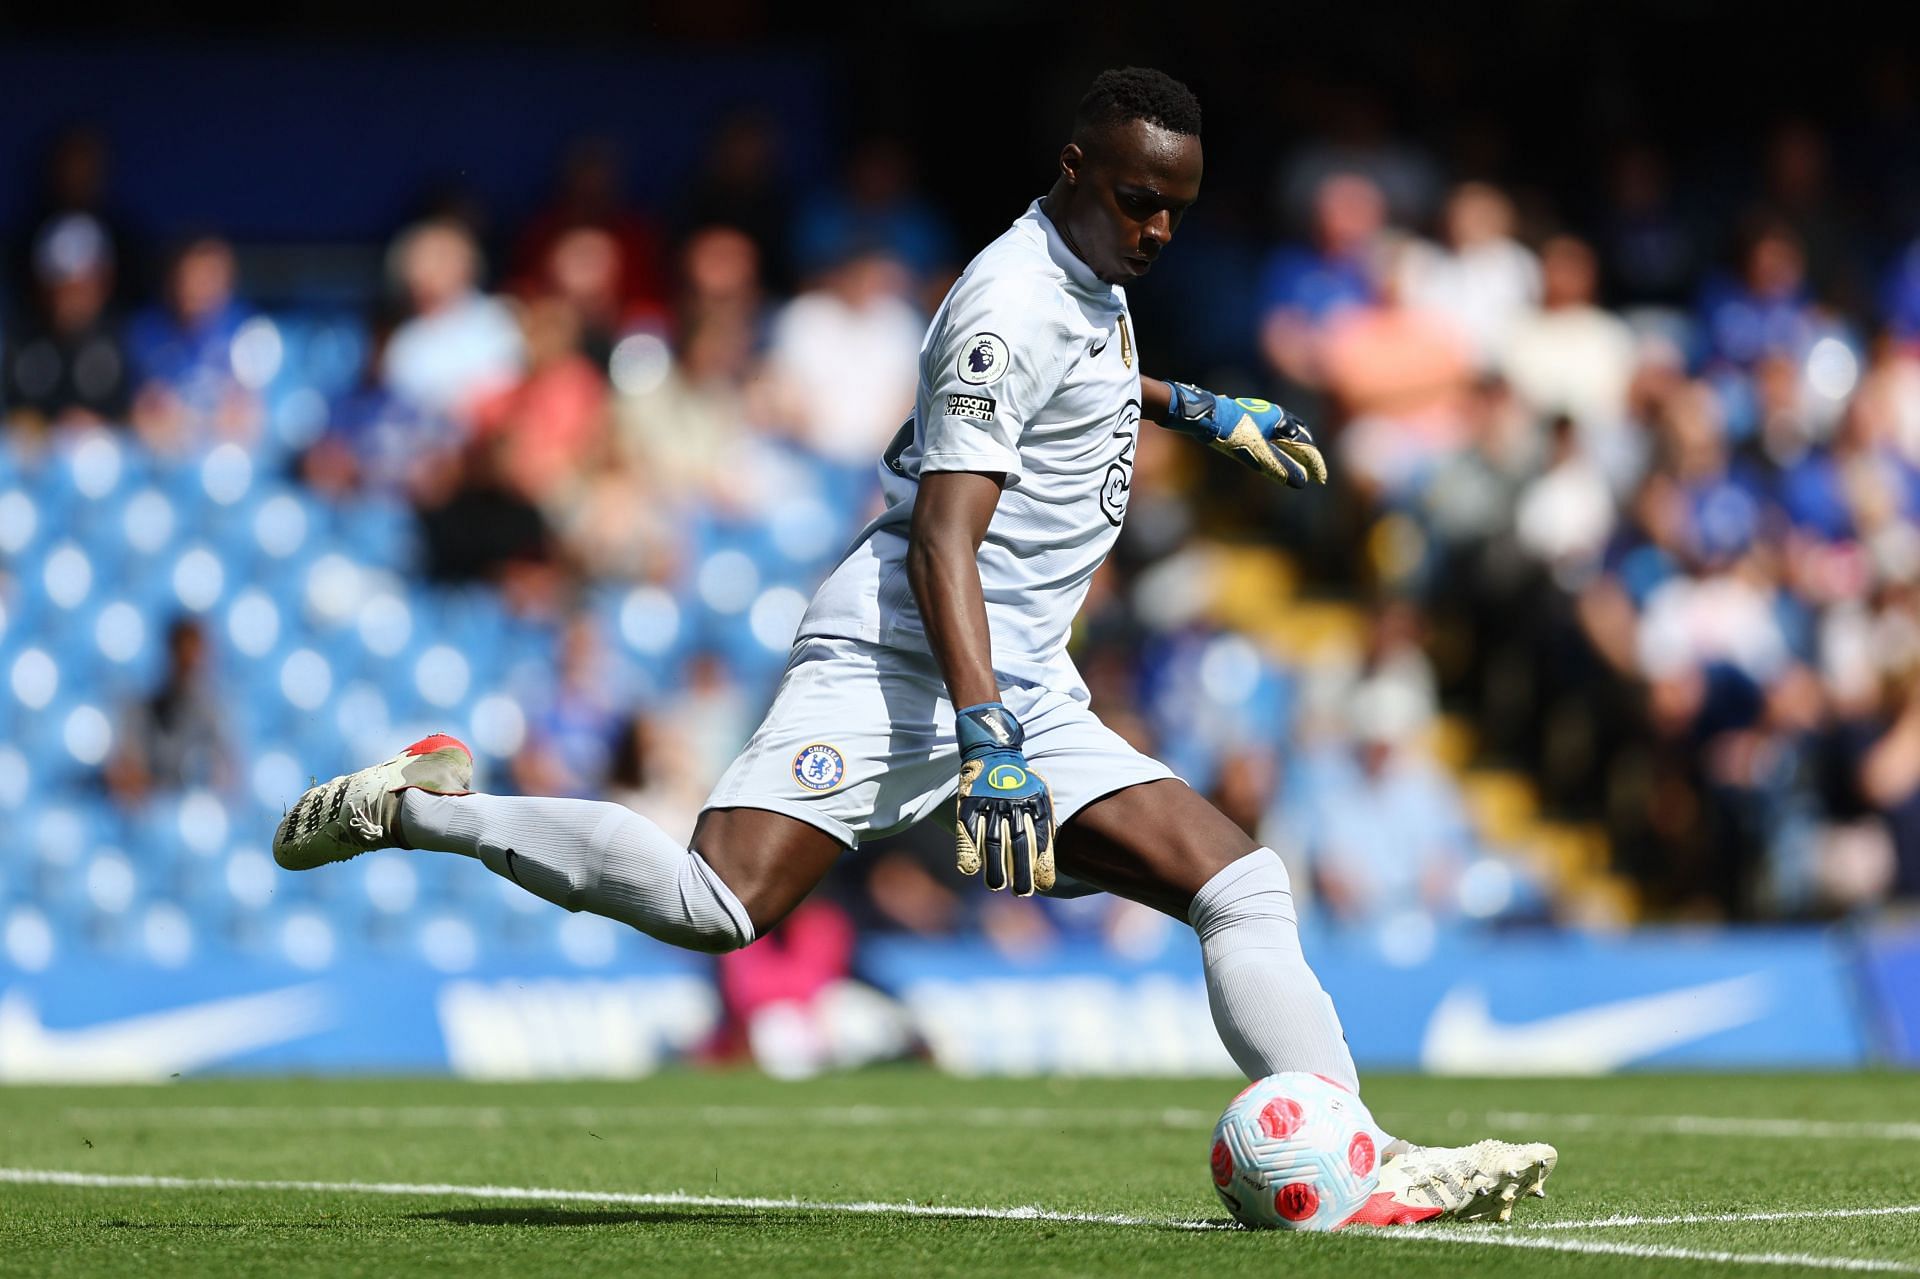 Edouard Mendy has been reliable between the sticks